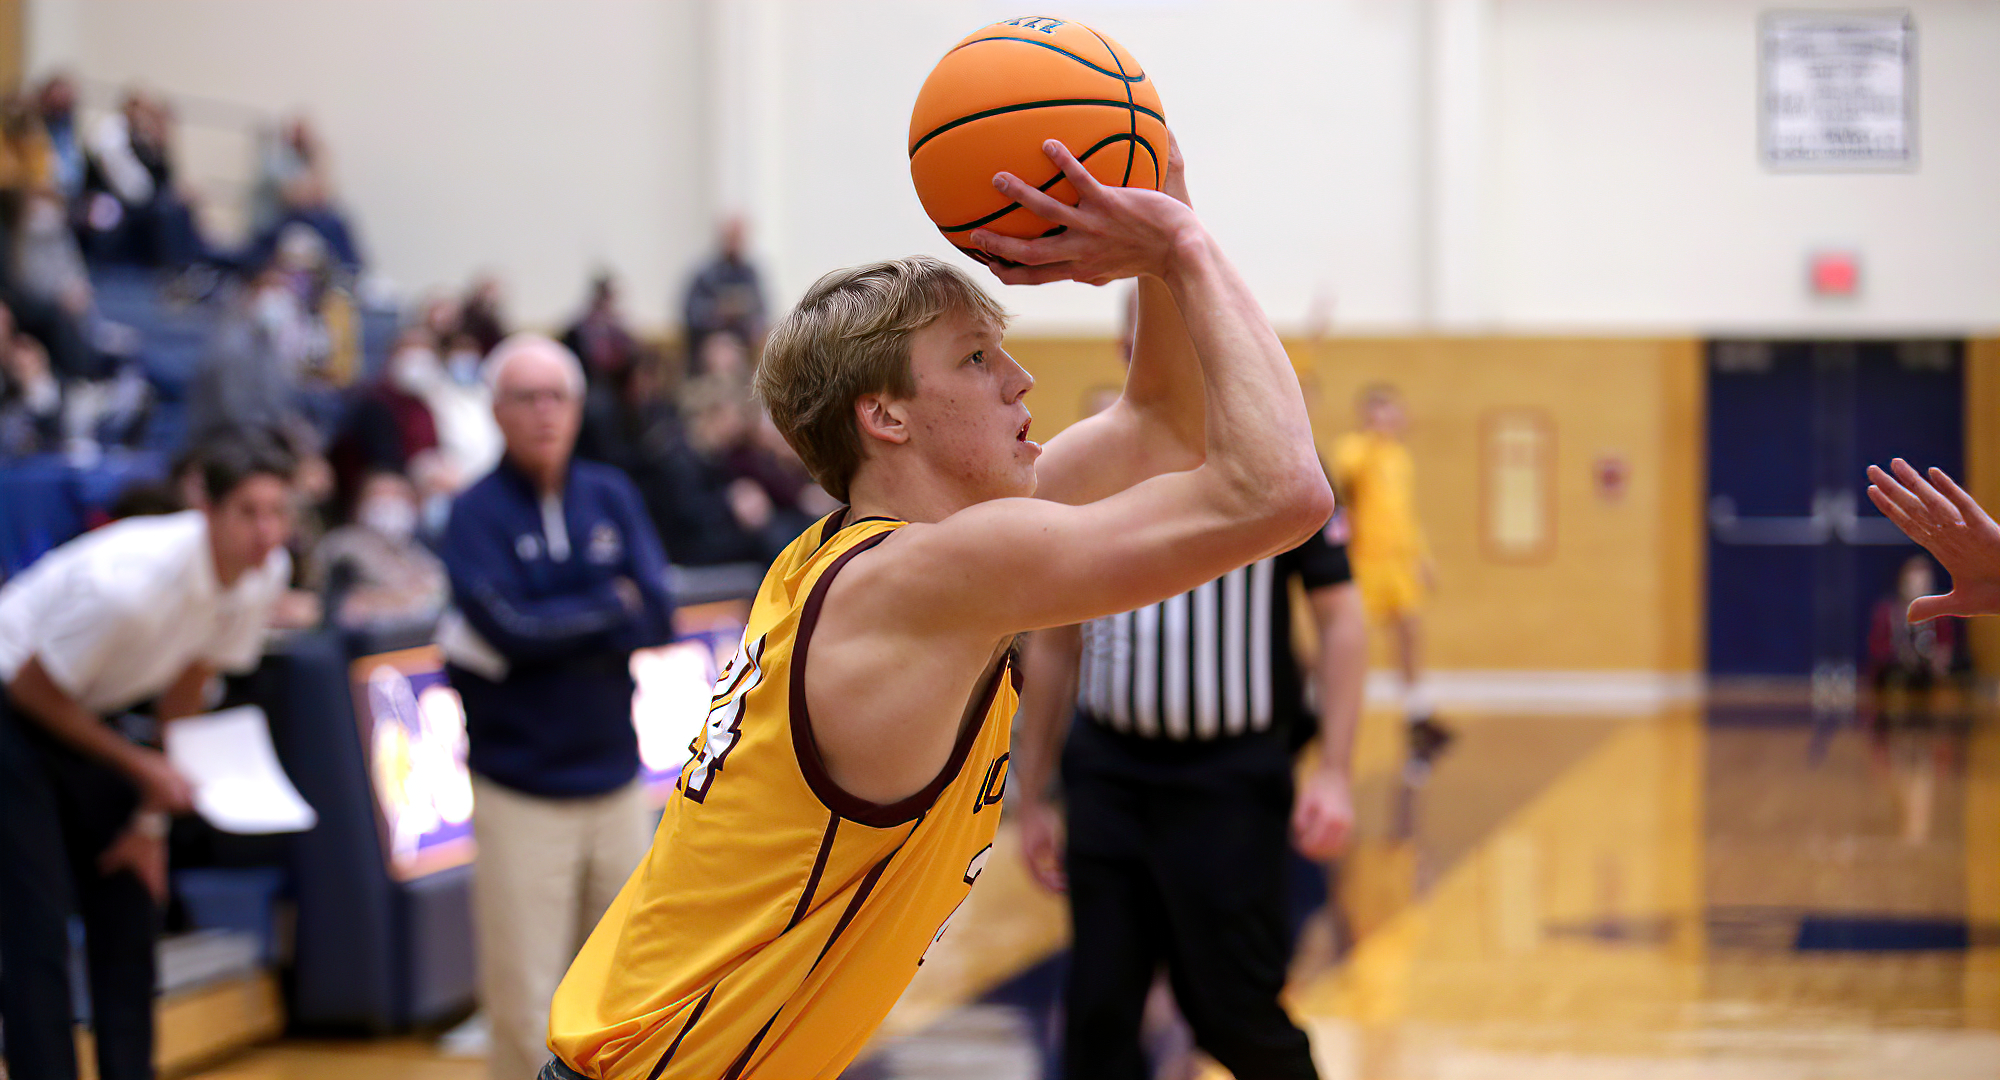 Freshman Dylan Inniger gets ready to take a shot in the Cobbers' game at Carleton. He had a team-high 10 points. (Photo courtesy of Ryan Coleman, D3photography)